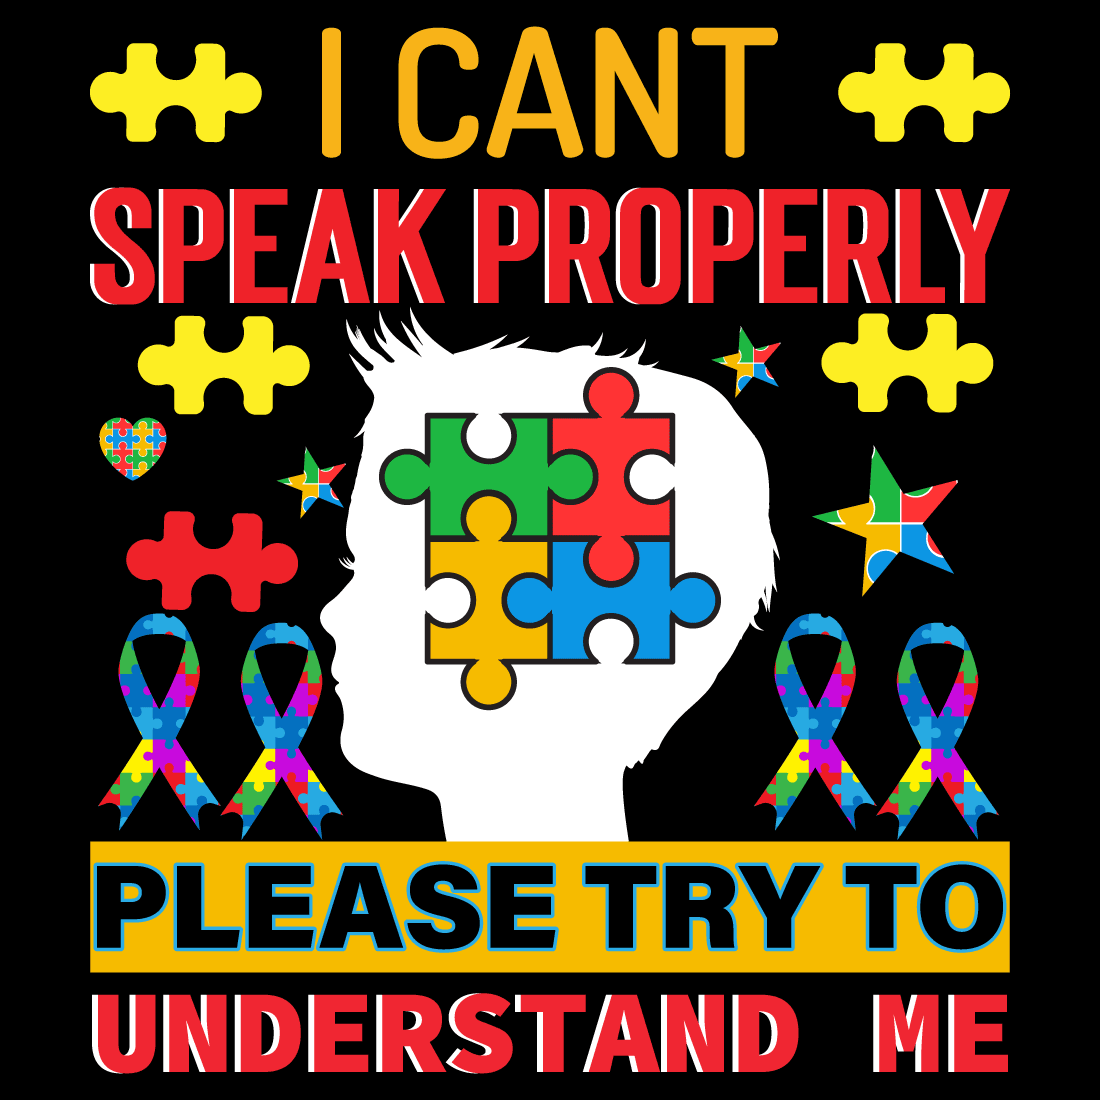 I can't speak properly please try to understand me.